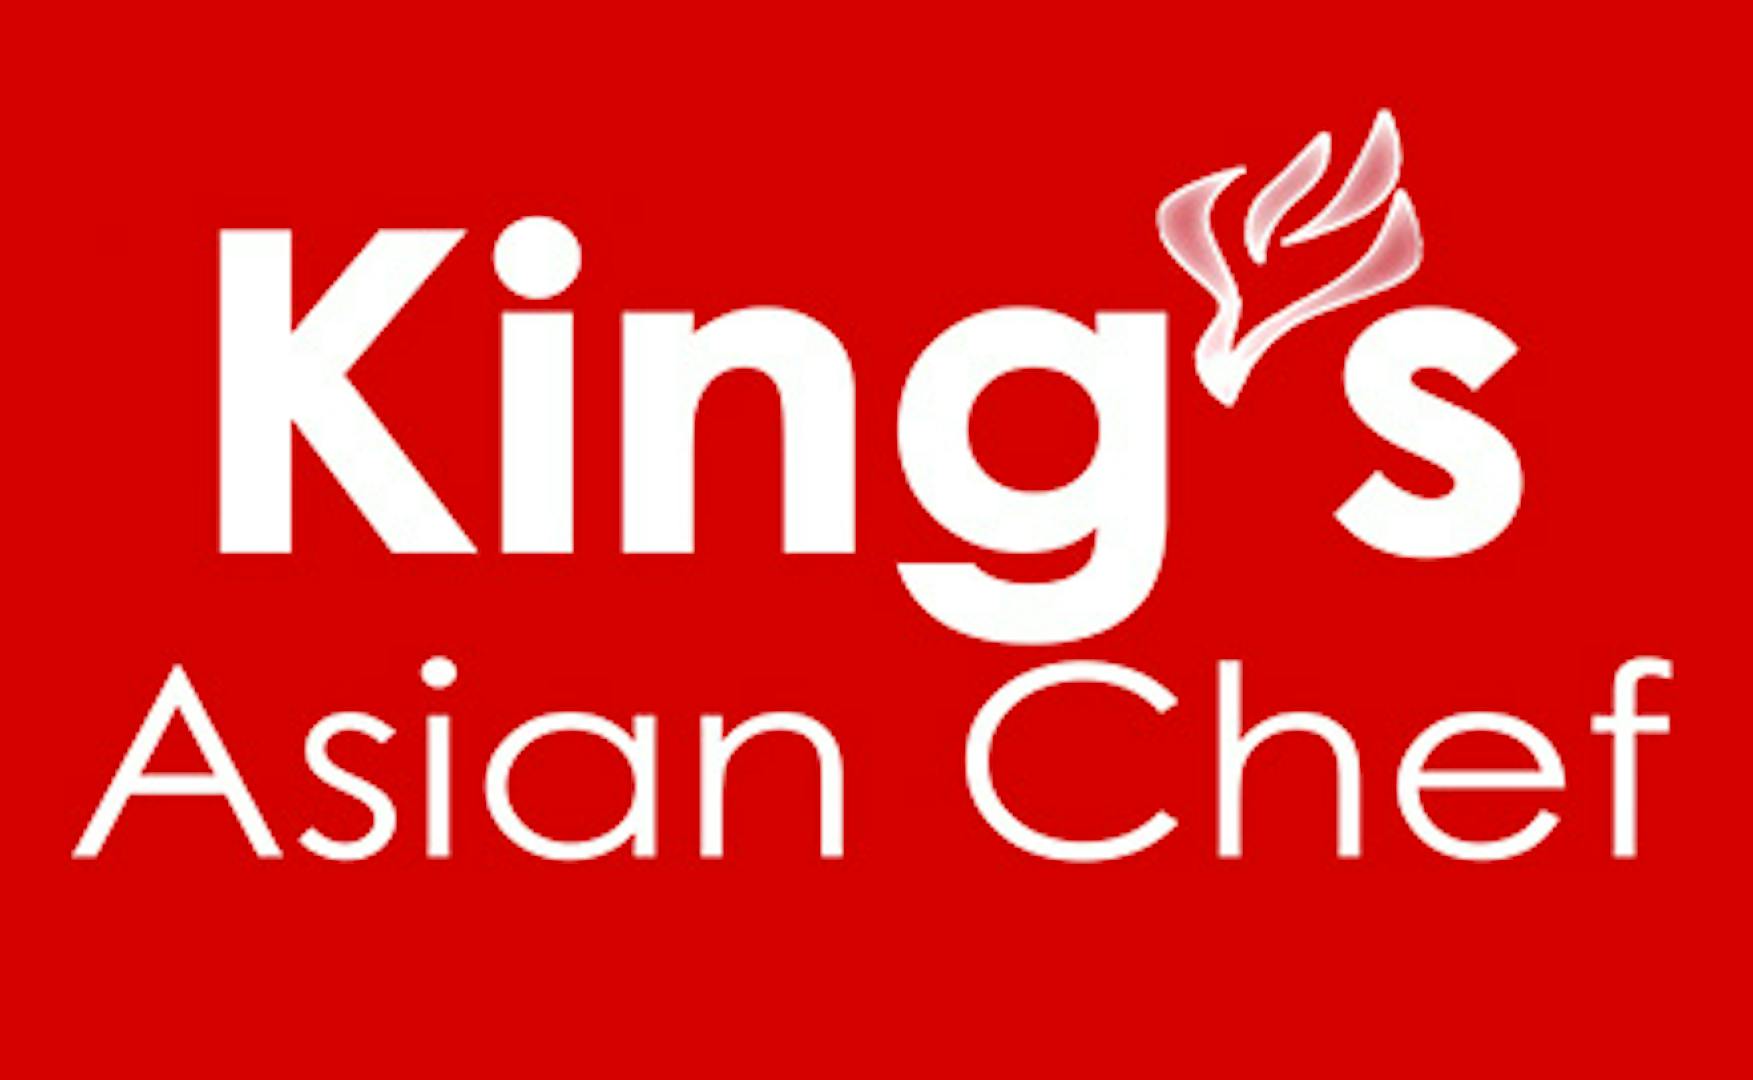 King's Asian Chef